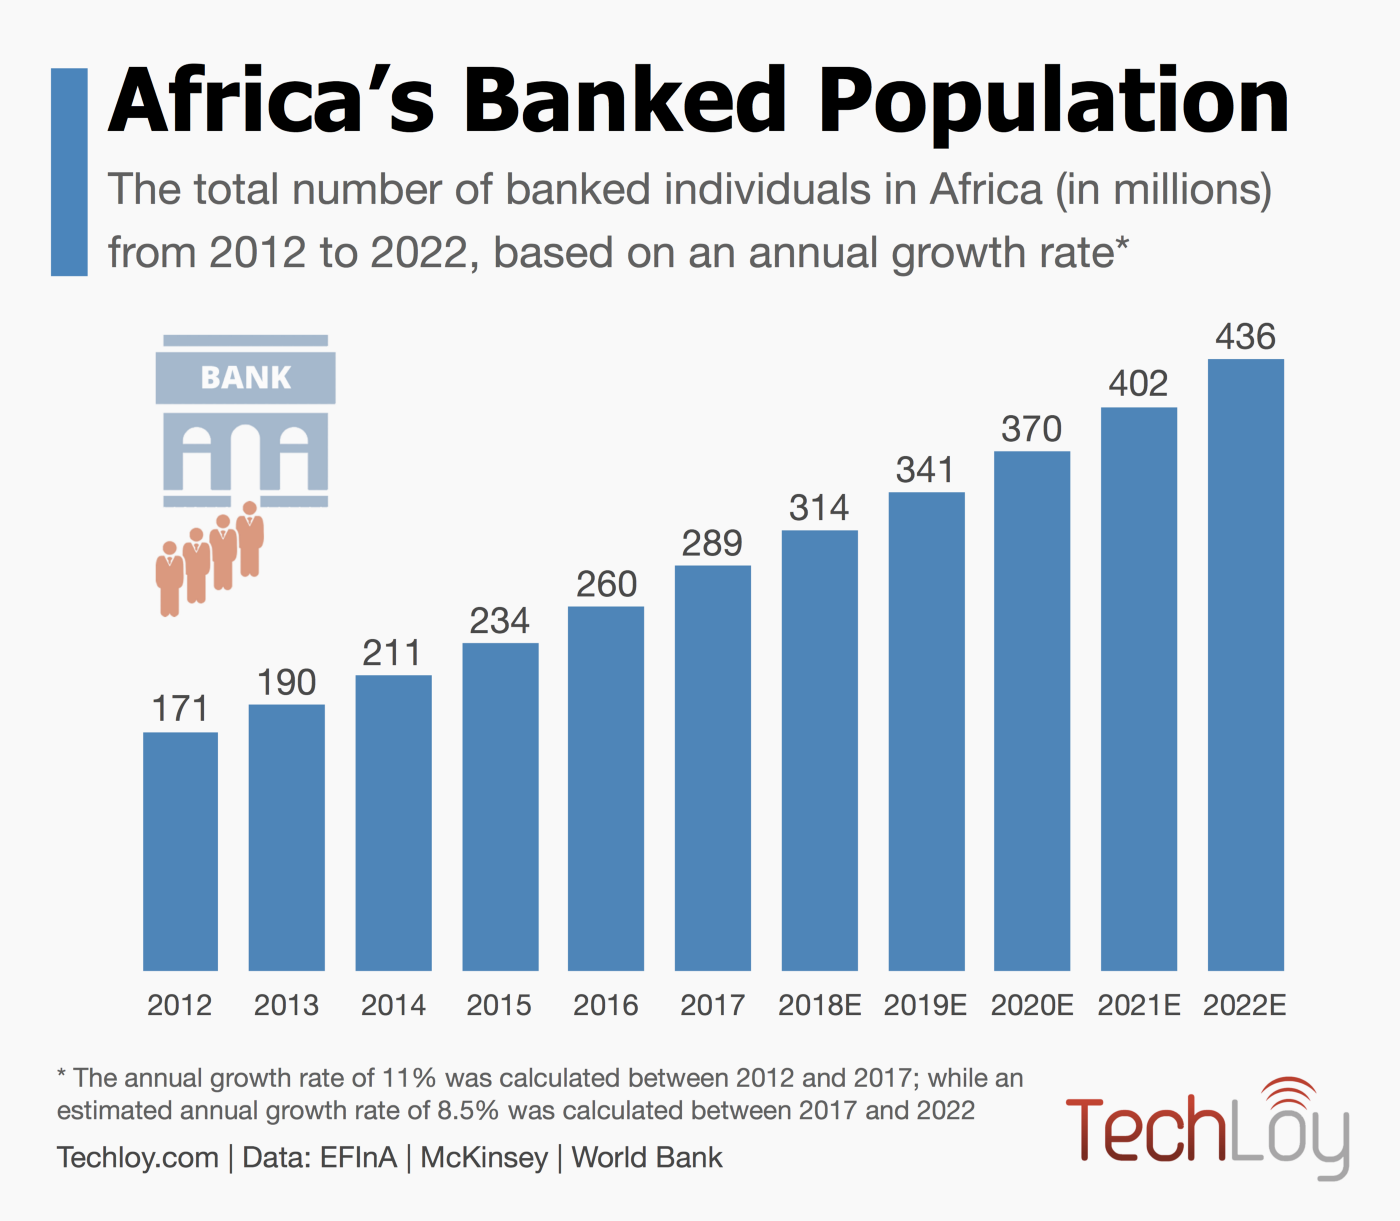 Africa’s Banked Population To Hit 400 Million By 2021